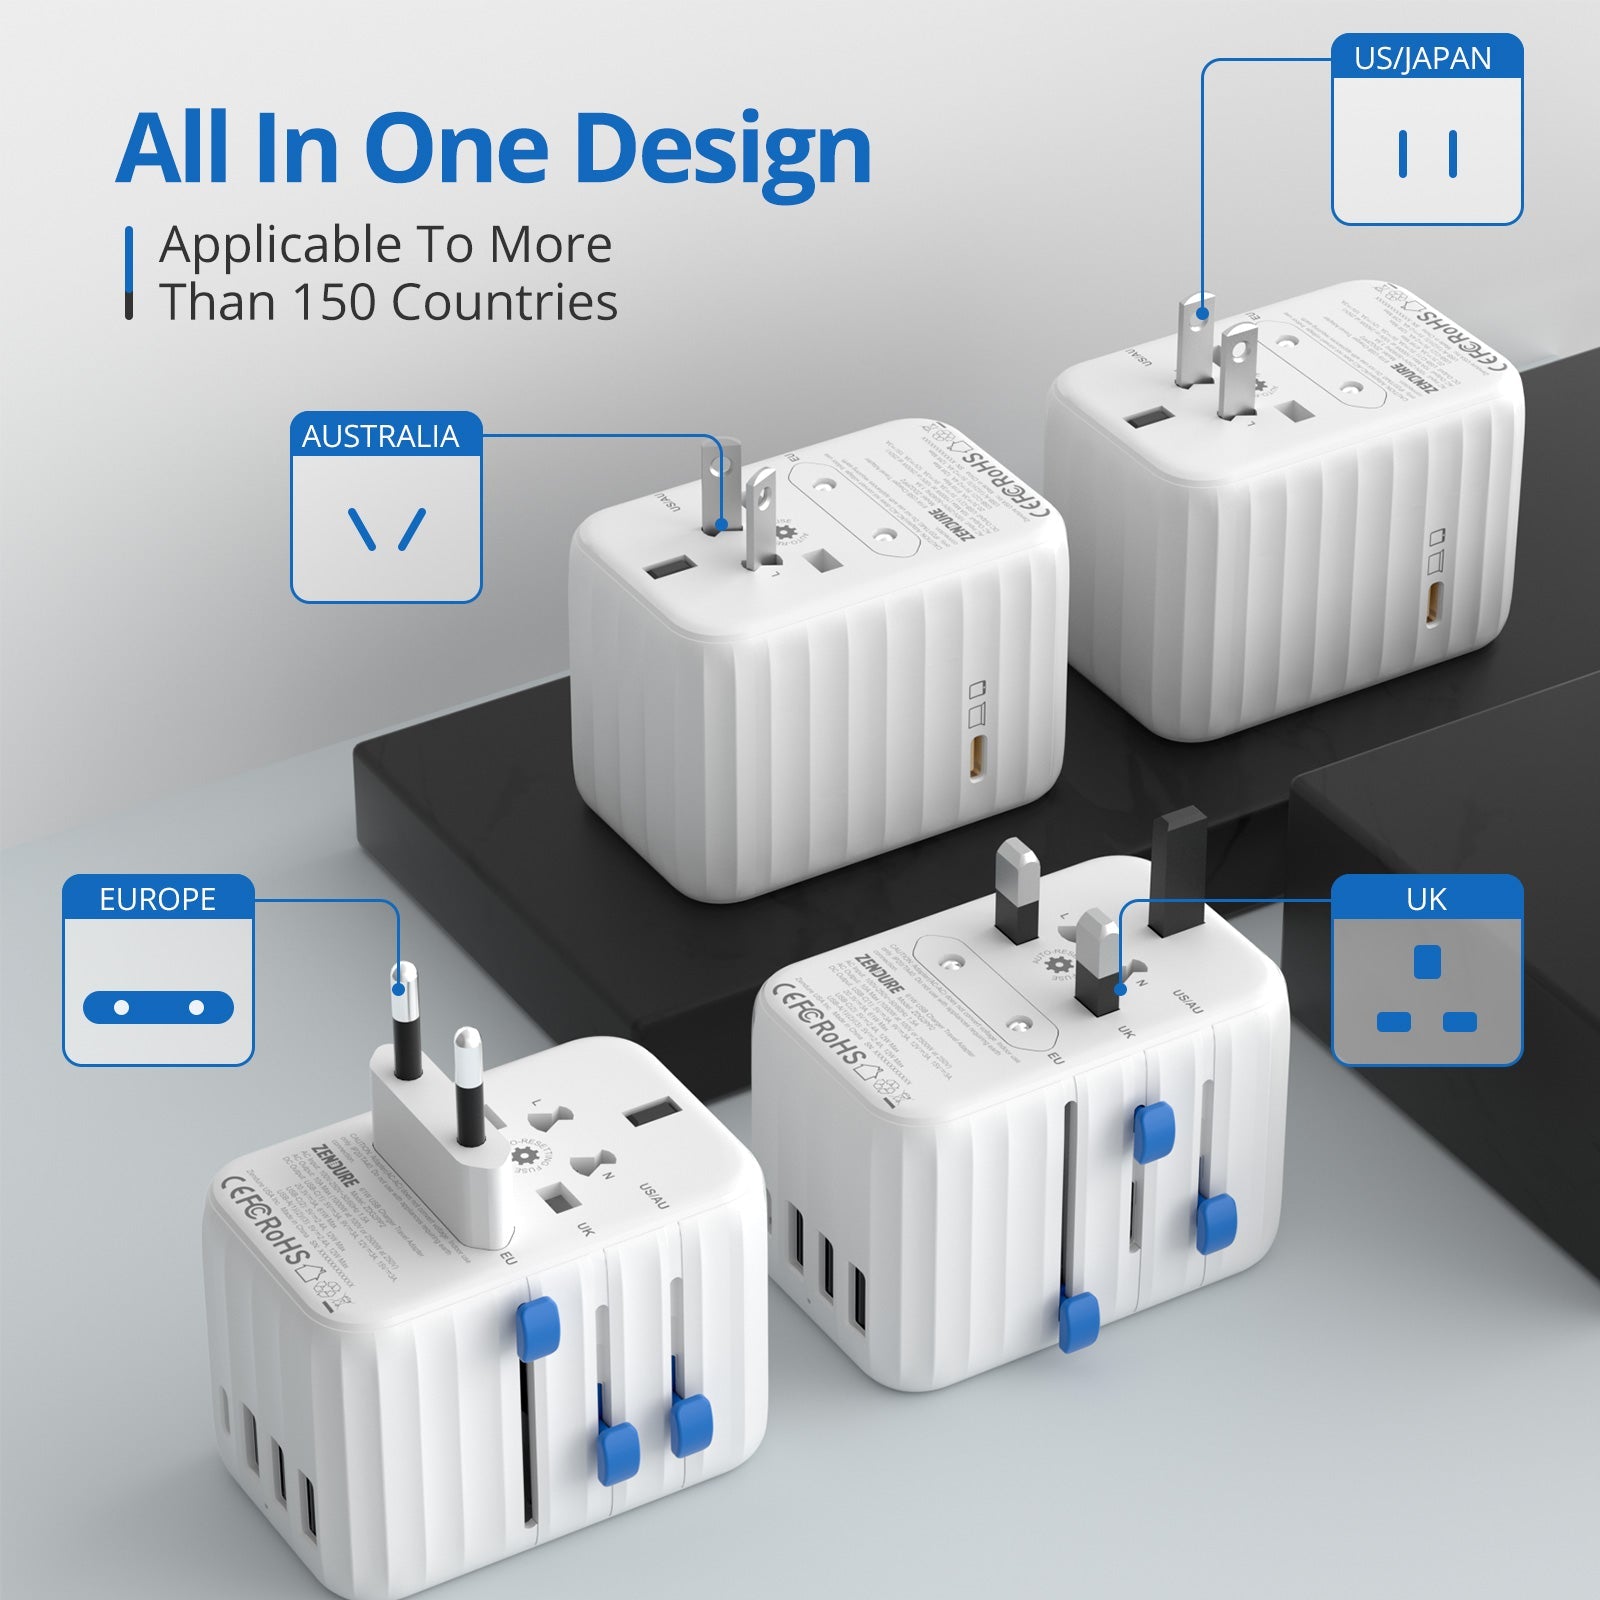 Passport II Pro - The Perfect Home and Travel Adapter